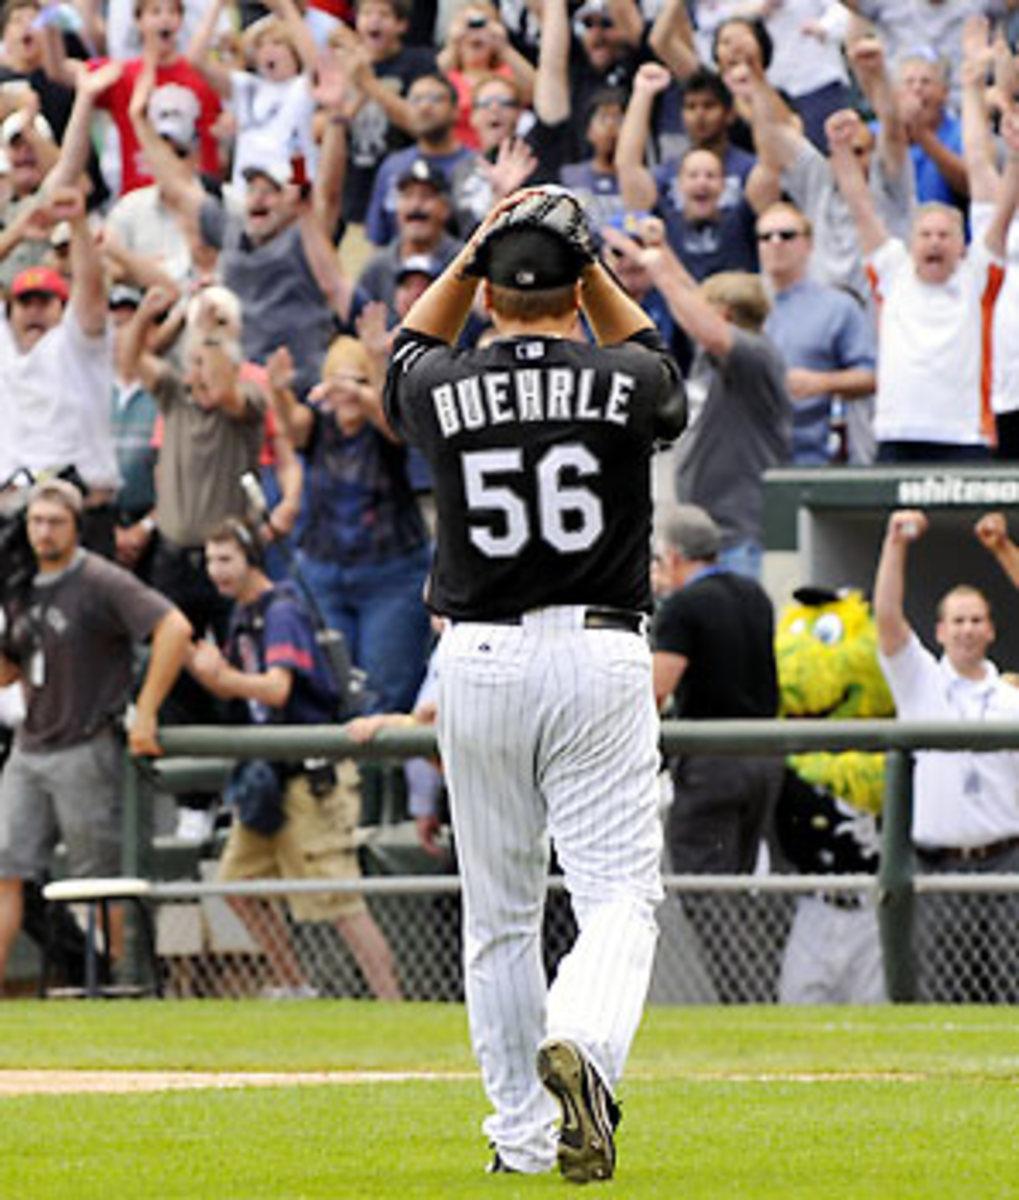 Oral history of Mark Buehrle's perfect game